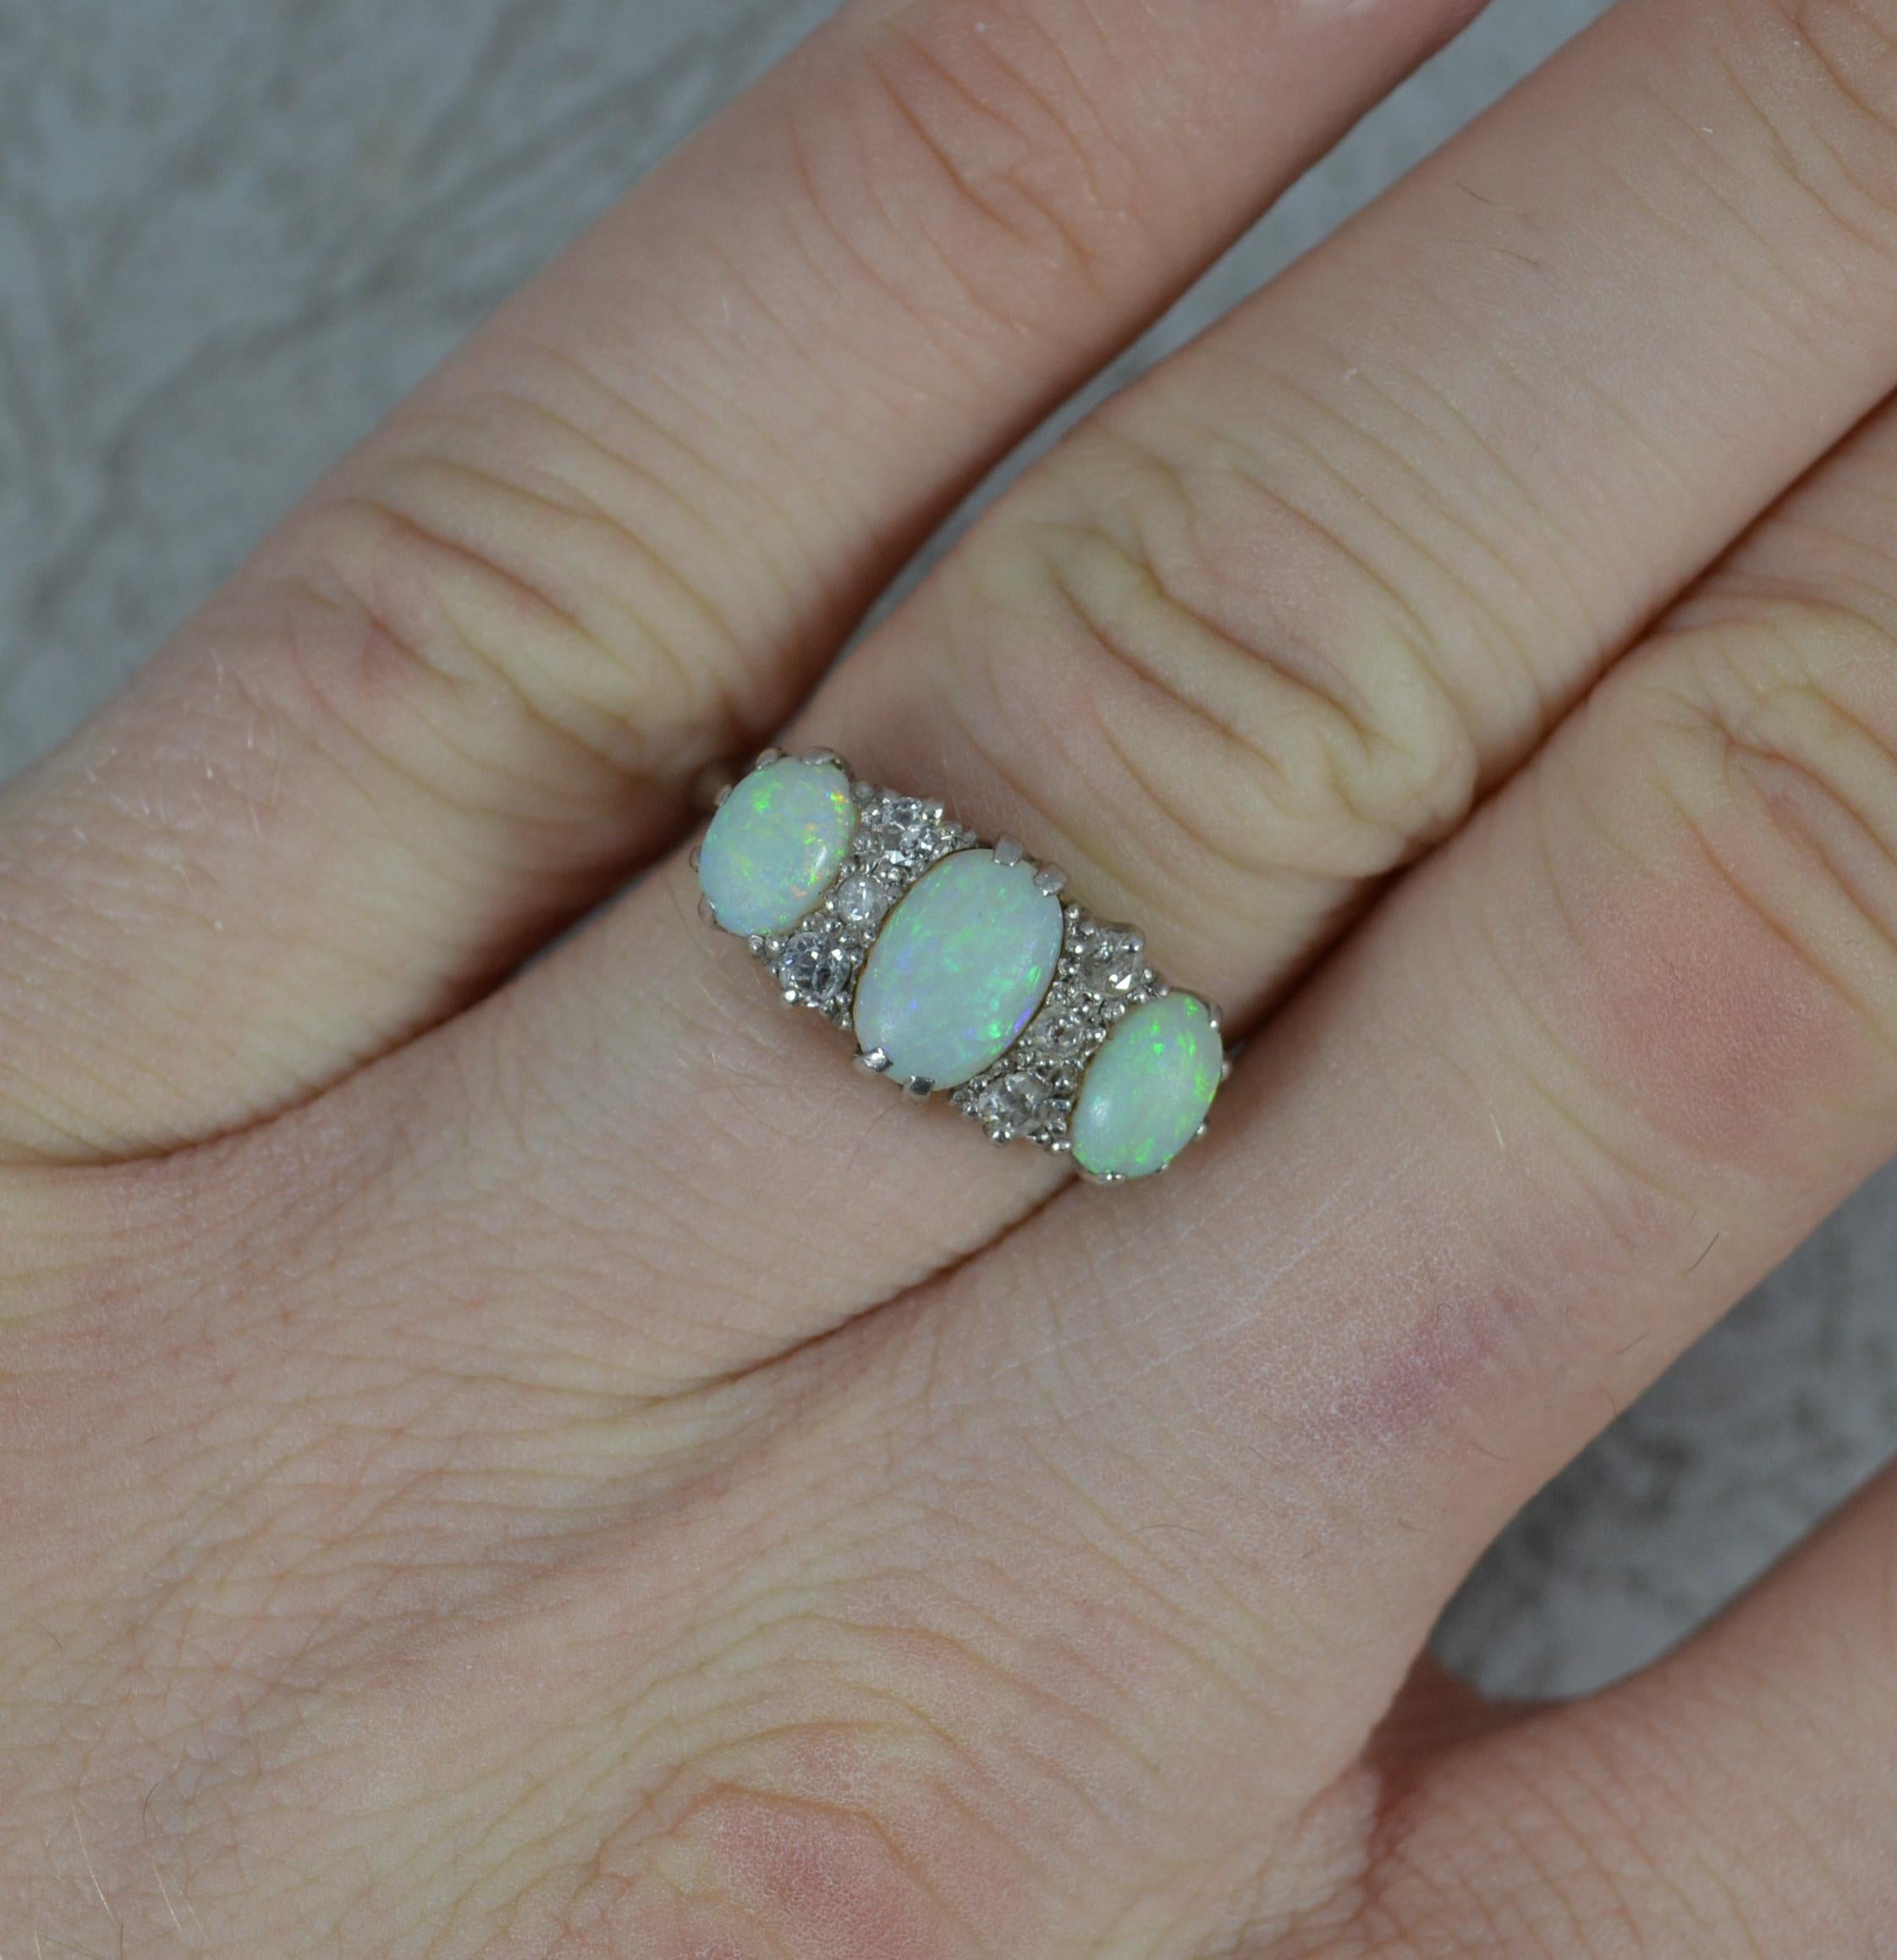 A superb Opald and Diamond cluster ring.
Solid 18 carat white gold example.
Set with three natural oval shaped opals with three natural diamonds in between. 5mm x 8mm central opal. Wonderful colour and quality stones, well matched.
17.5mm x 8mm